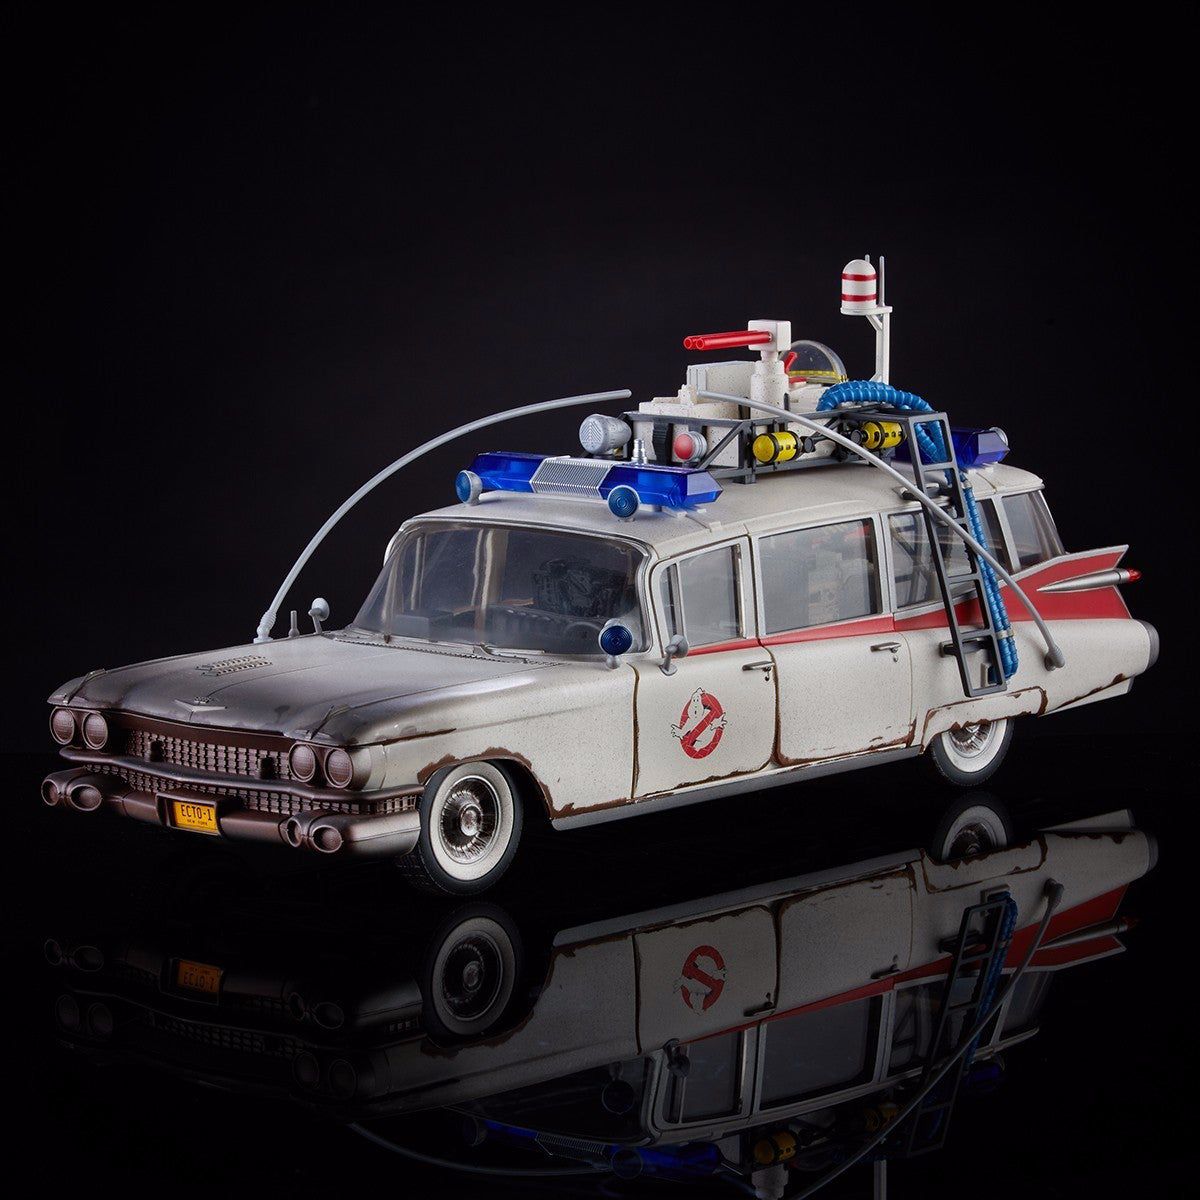 Ghostbusters Afterlife Ecto 1 Toy images #3